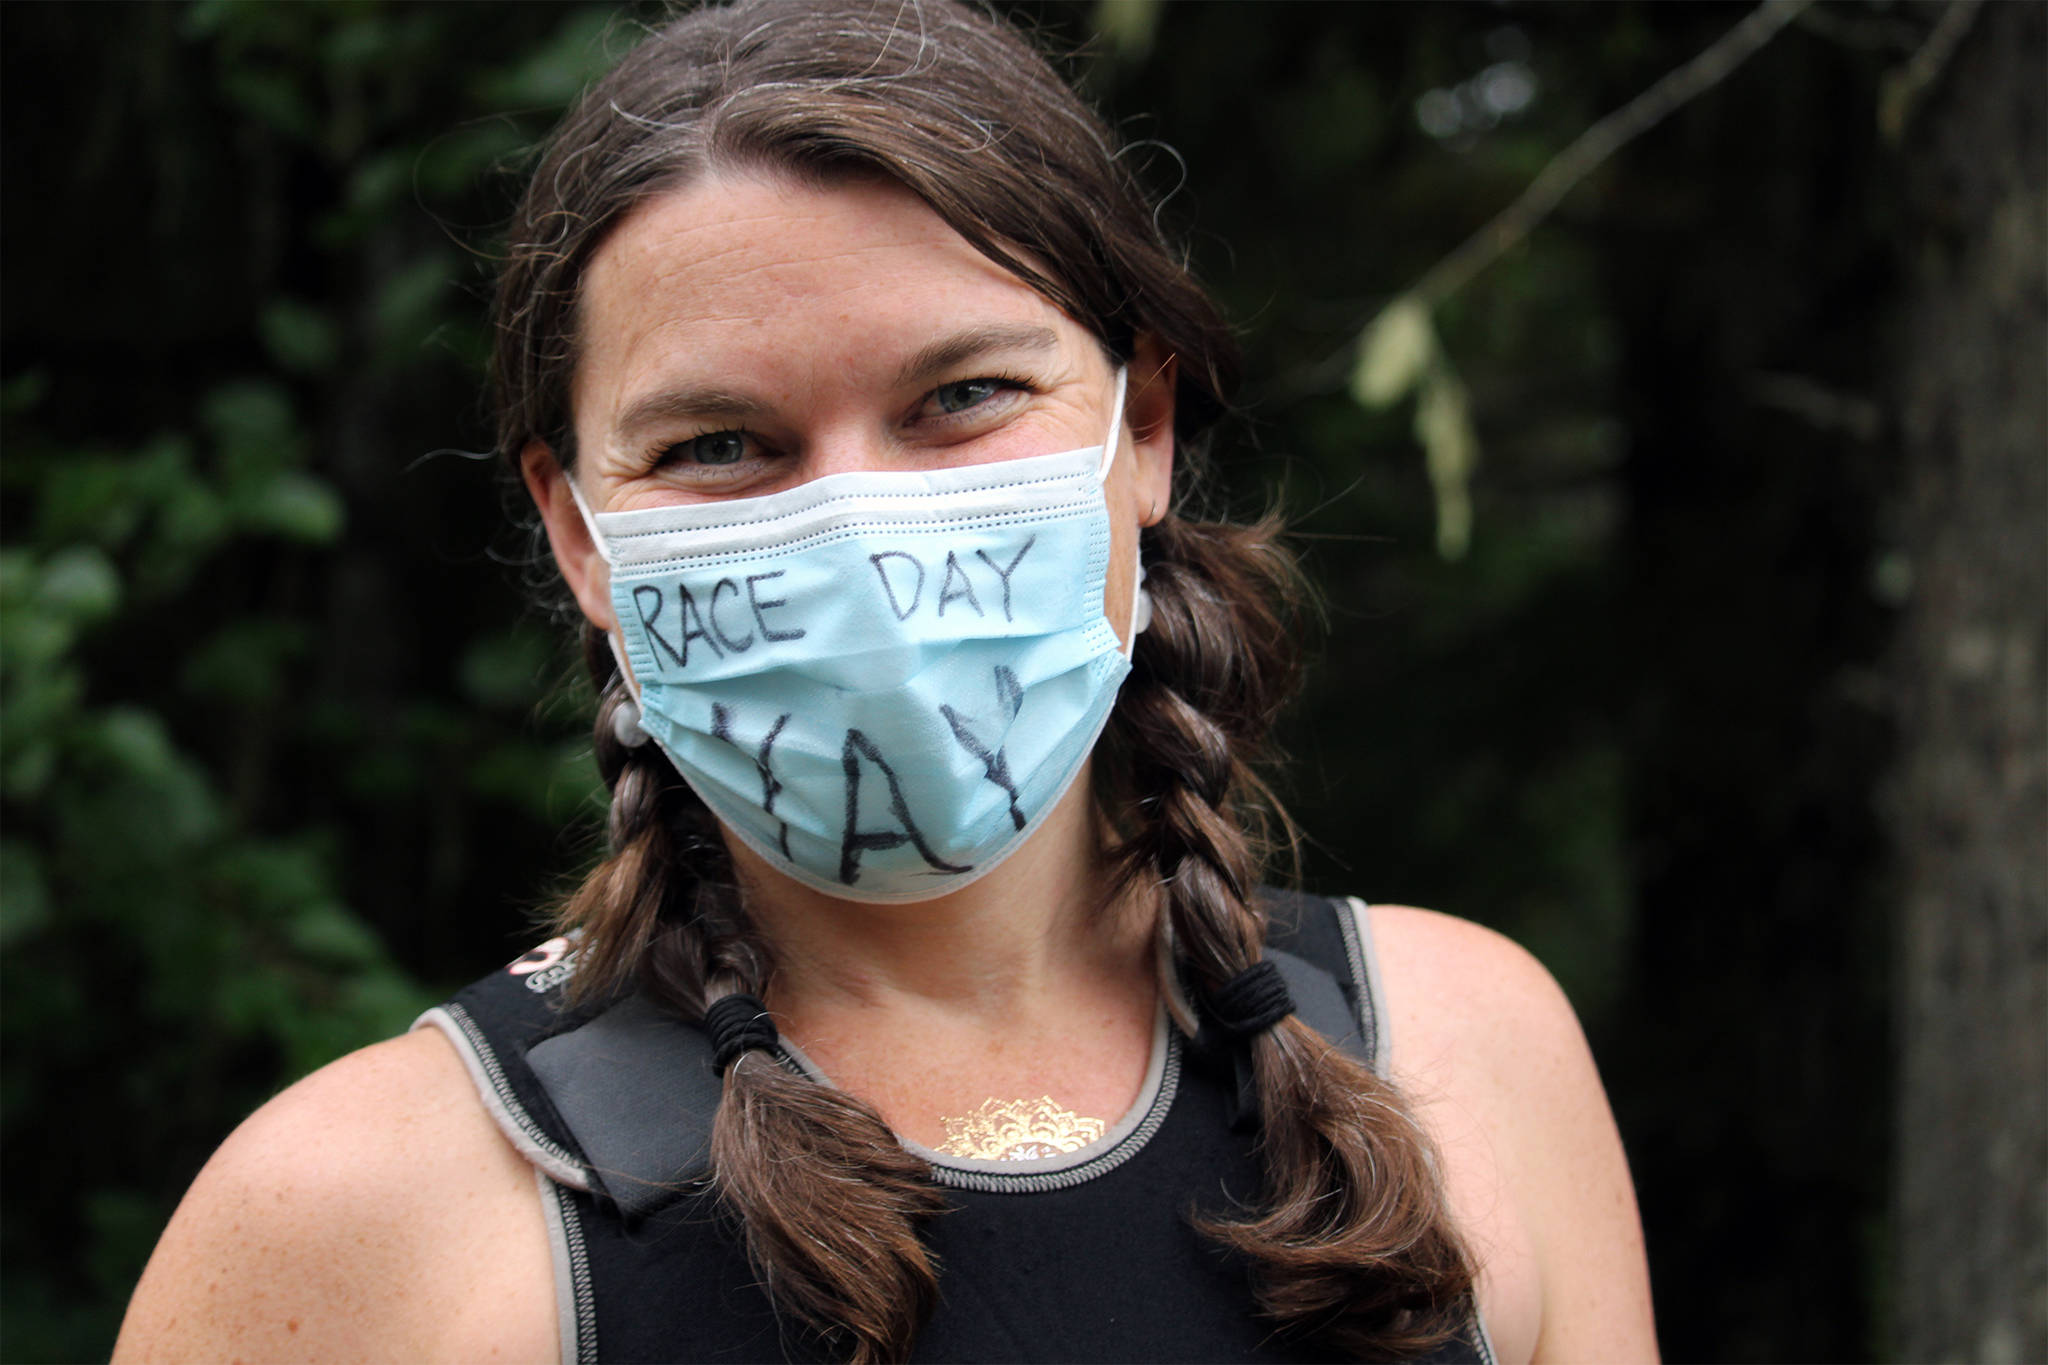 Juneau resident Katie Kowalchuk let her mask express her excitement before competing in the Aukeman Triathlon on Saturday, August 7. Organizers adopted COVID mitigations, including pre-race masking and distancing, as part of the event. (Dana Zigmund/Juneau Empire)